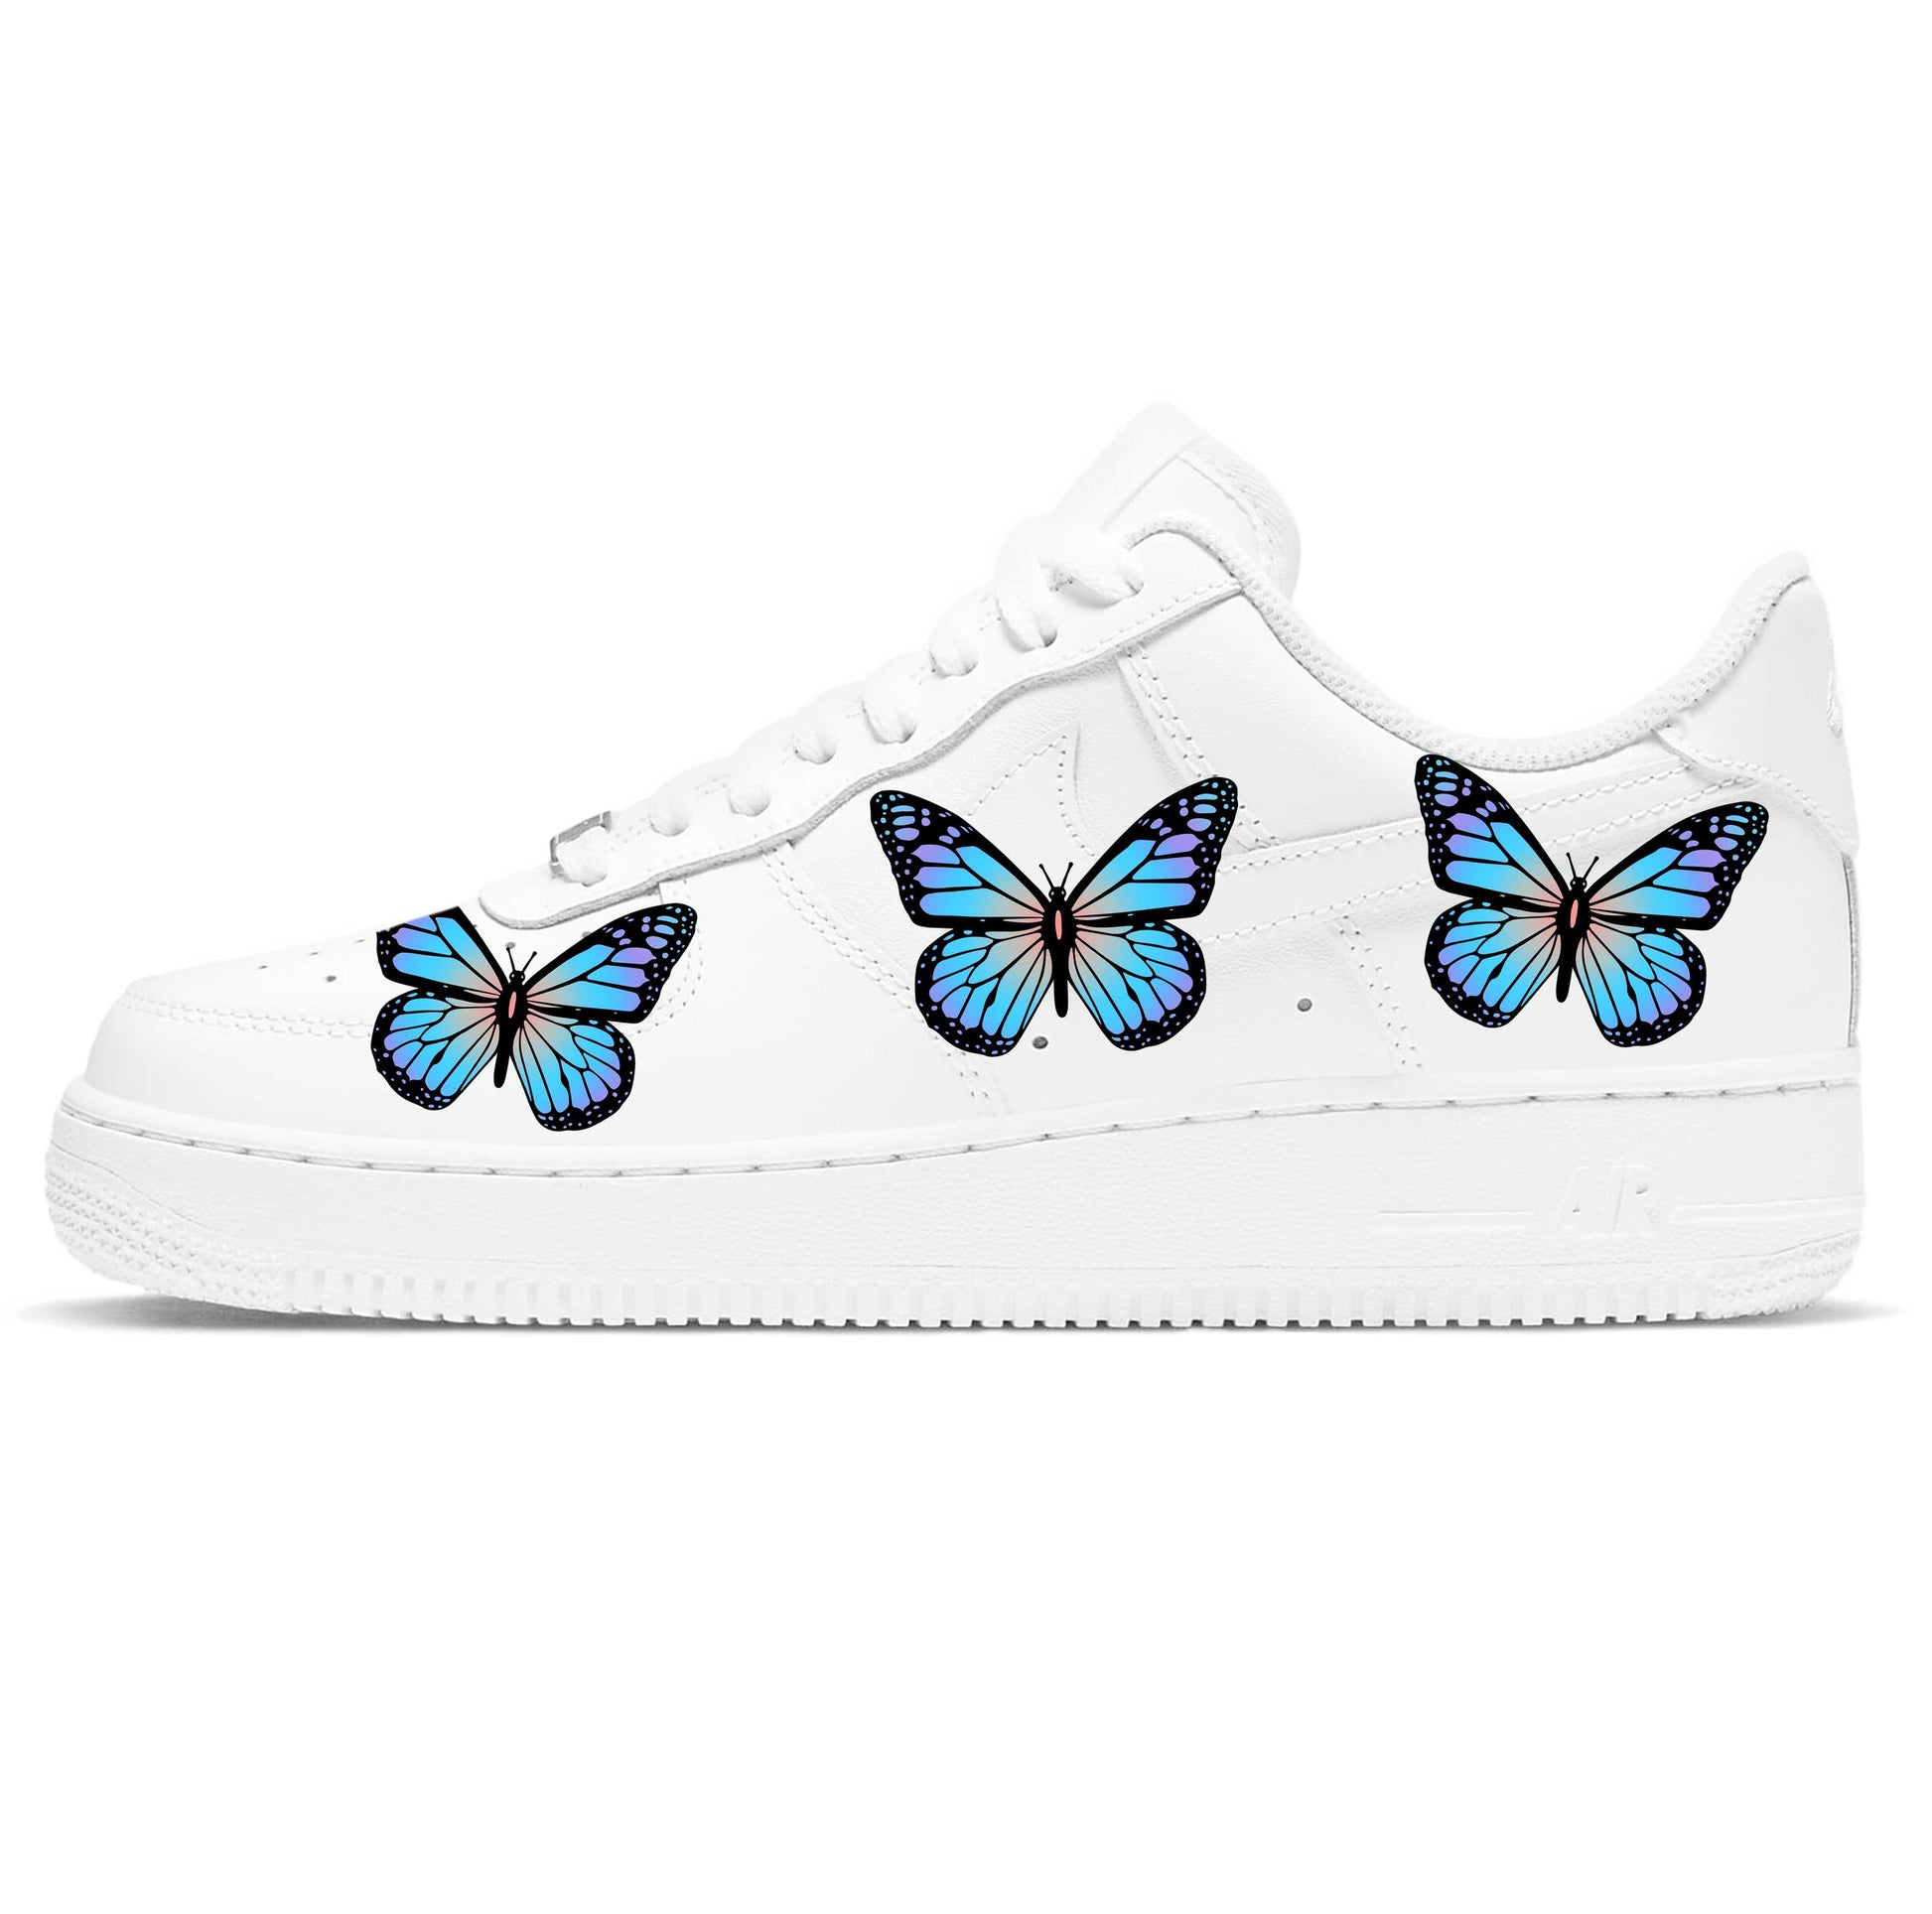 NIKE AIRFORCE 1 WITH STICKER SHOES FOR WOMEN